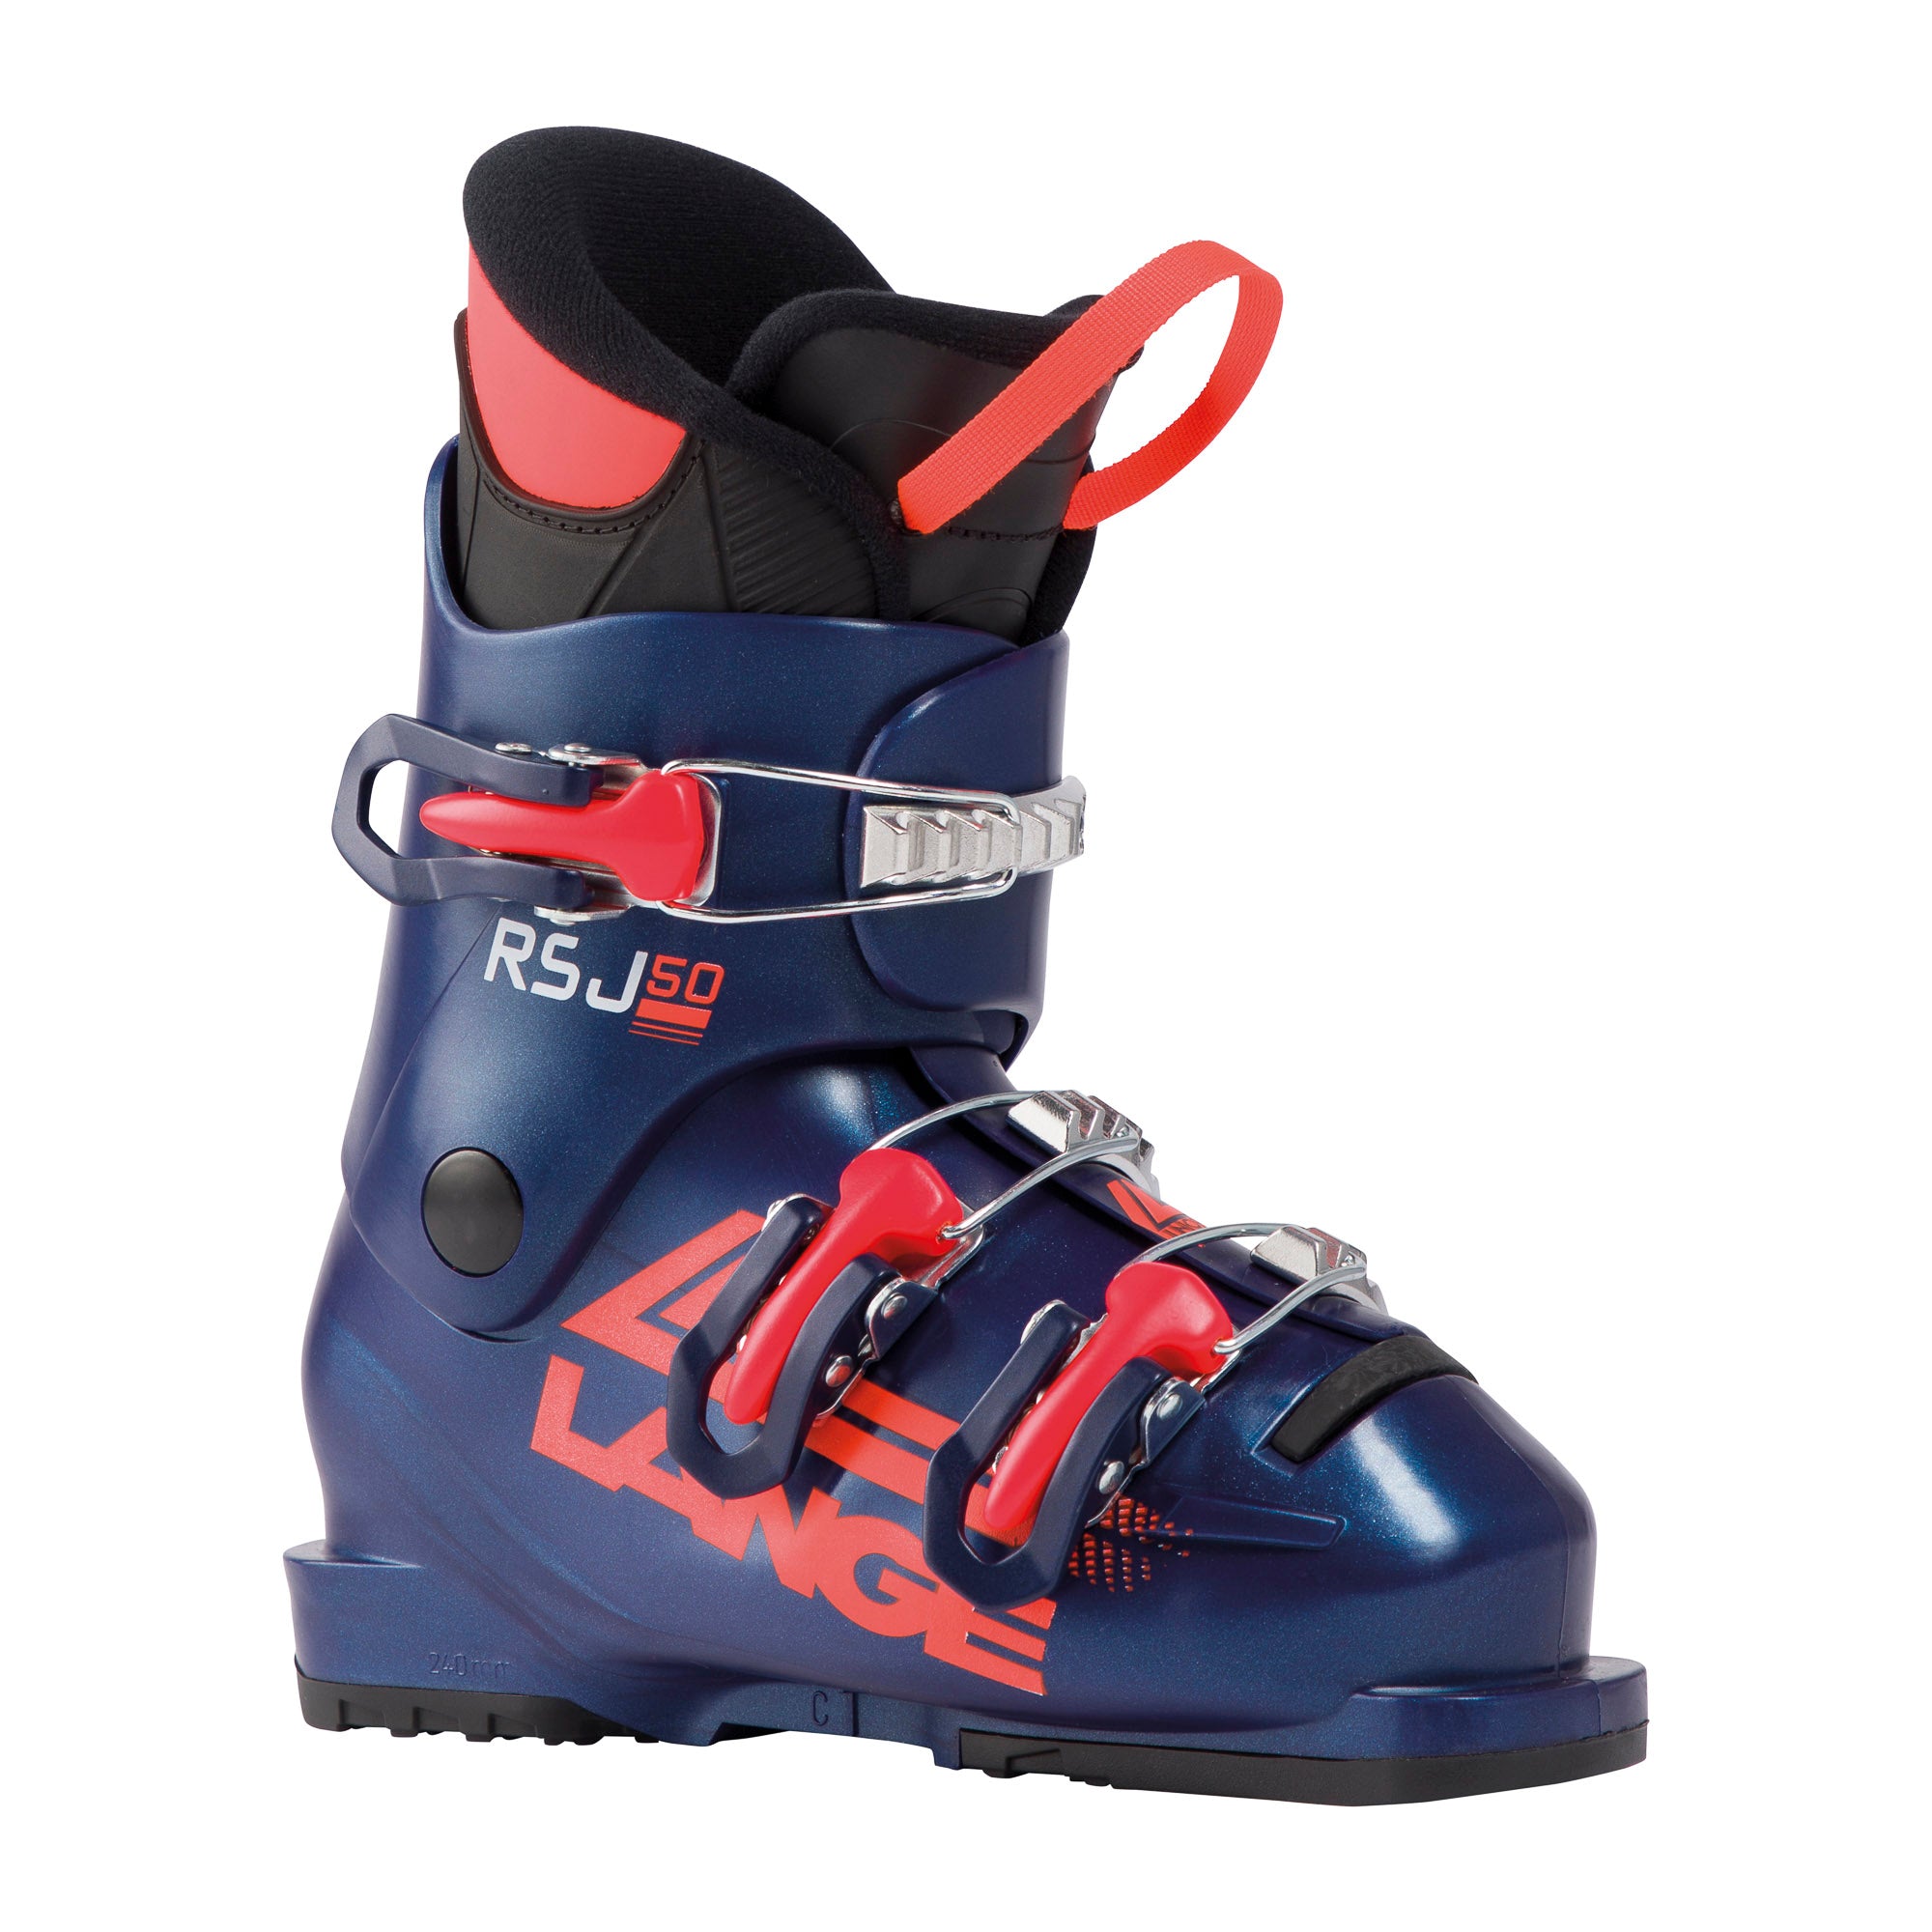 Junior Lange RSJ 50 ski boot, dark blue with neon red accents and 3 buckles.